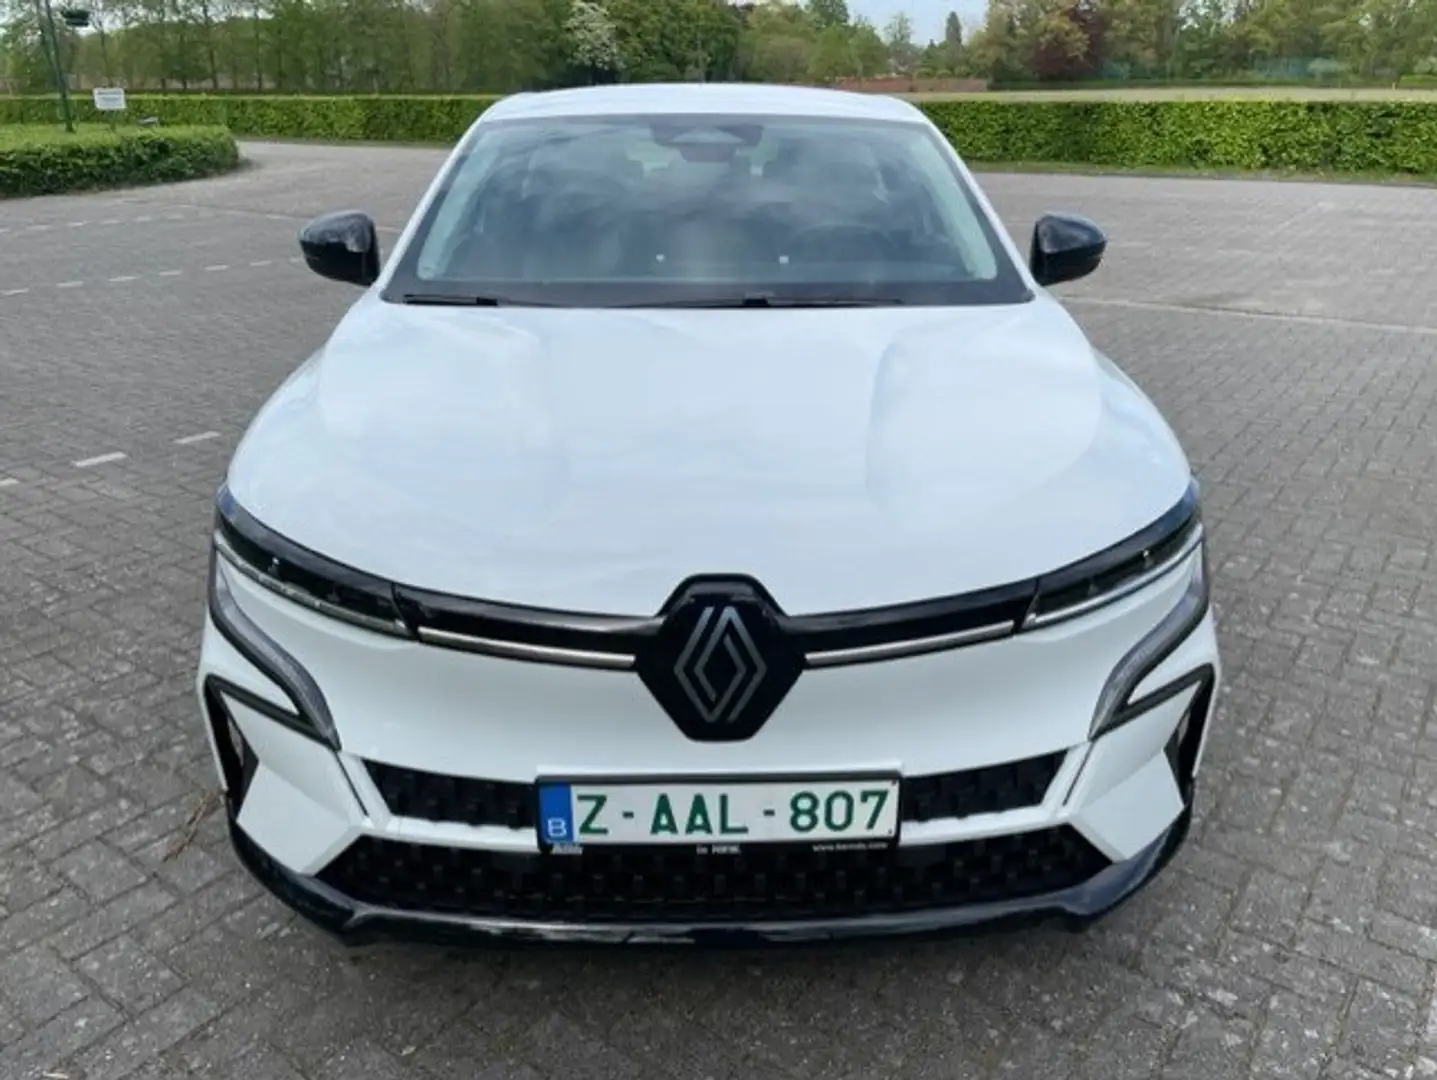 Renault Megane E-Tech 40 kWh Equilibre R130 Standard charge DEMOWAGEN Wit - 2